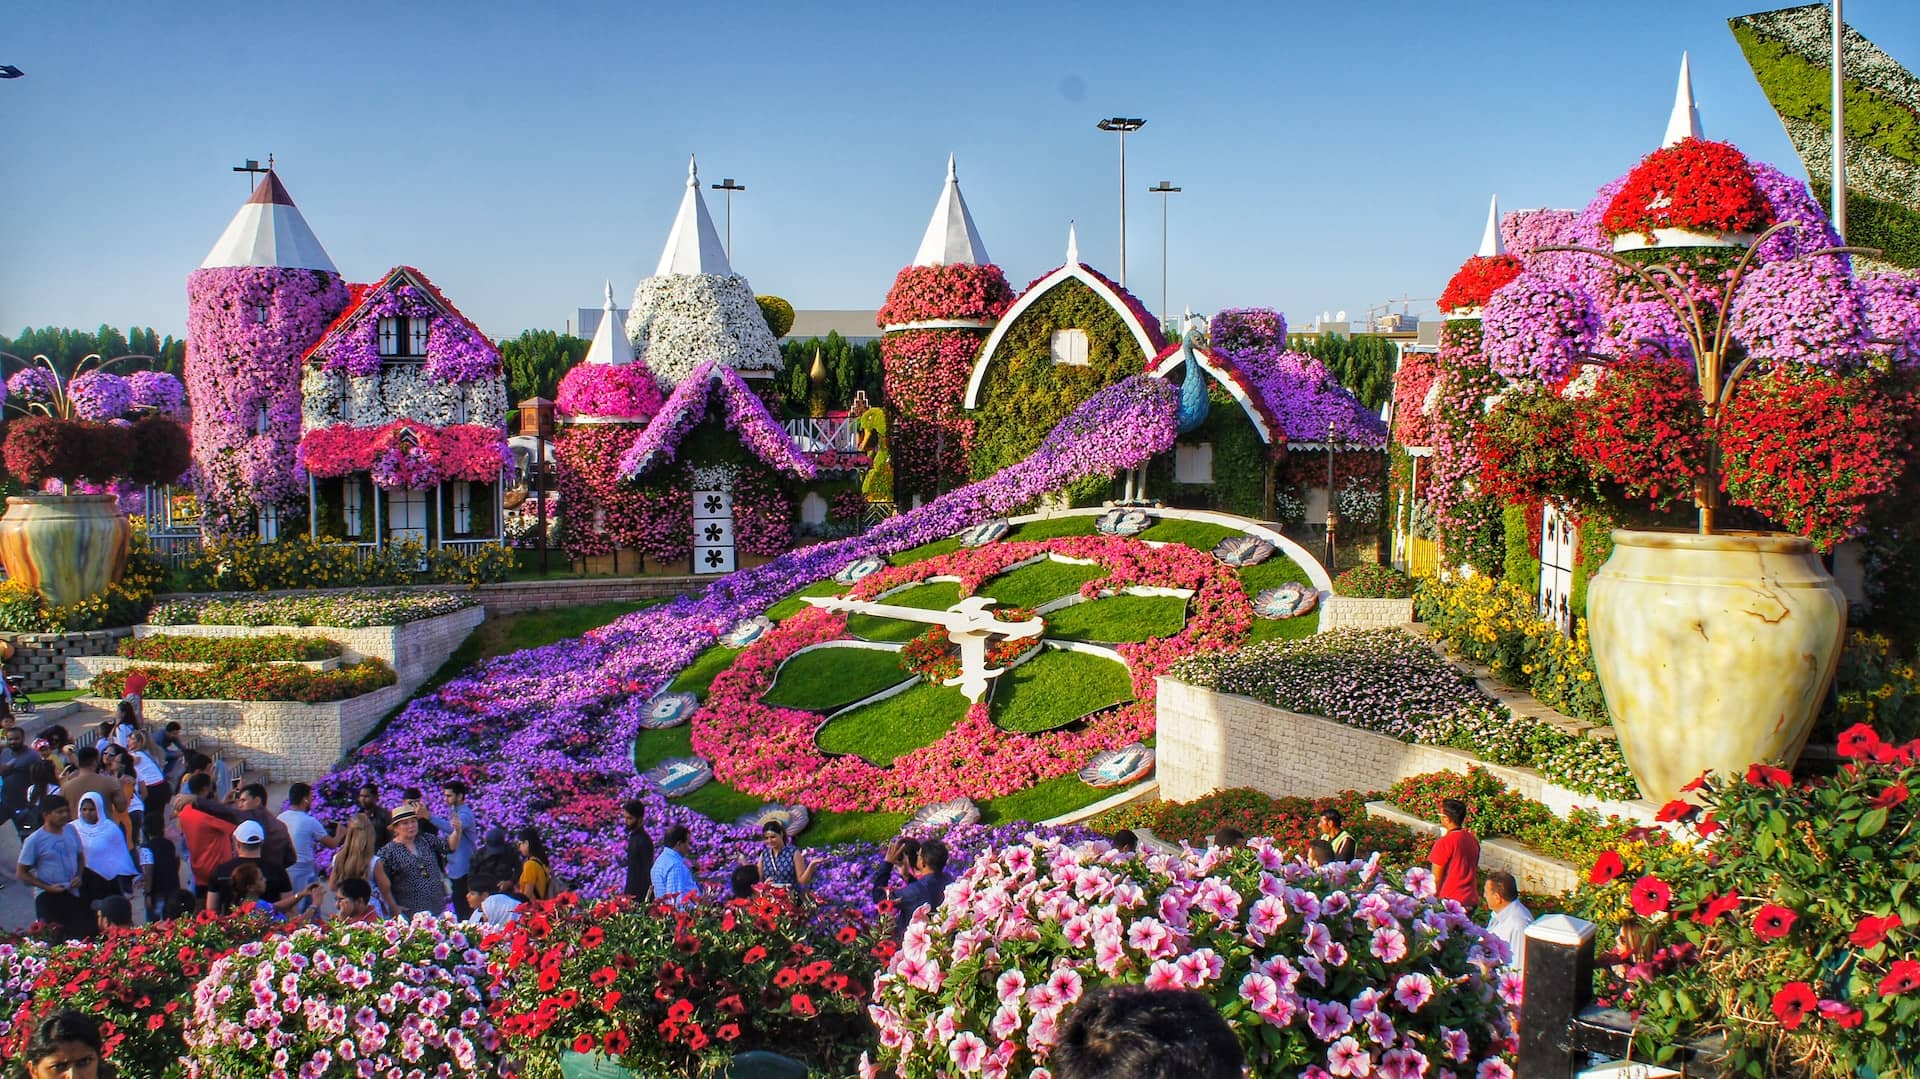 the largest flower garden in the world is in Dubai